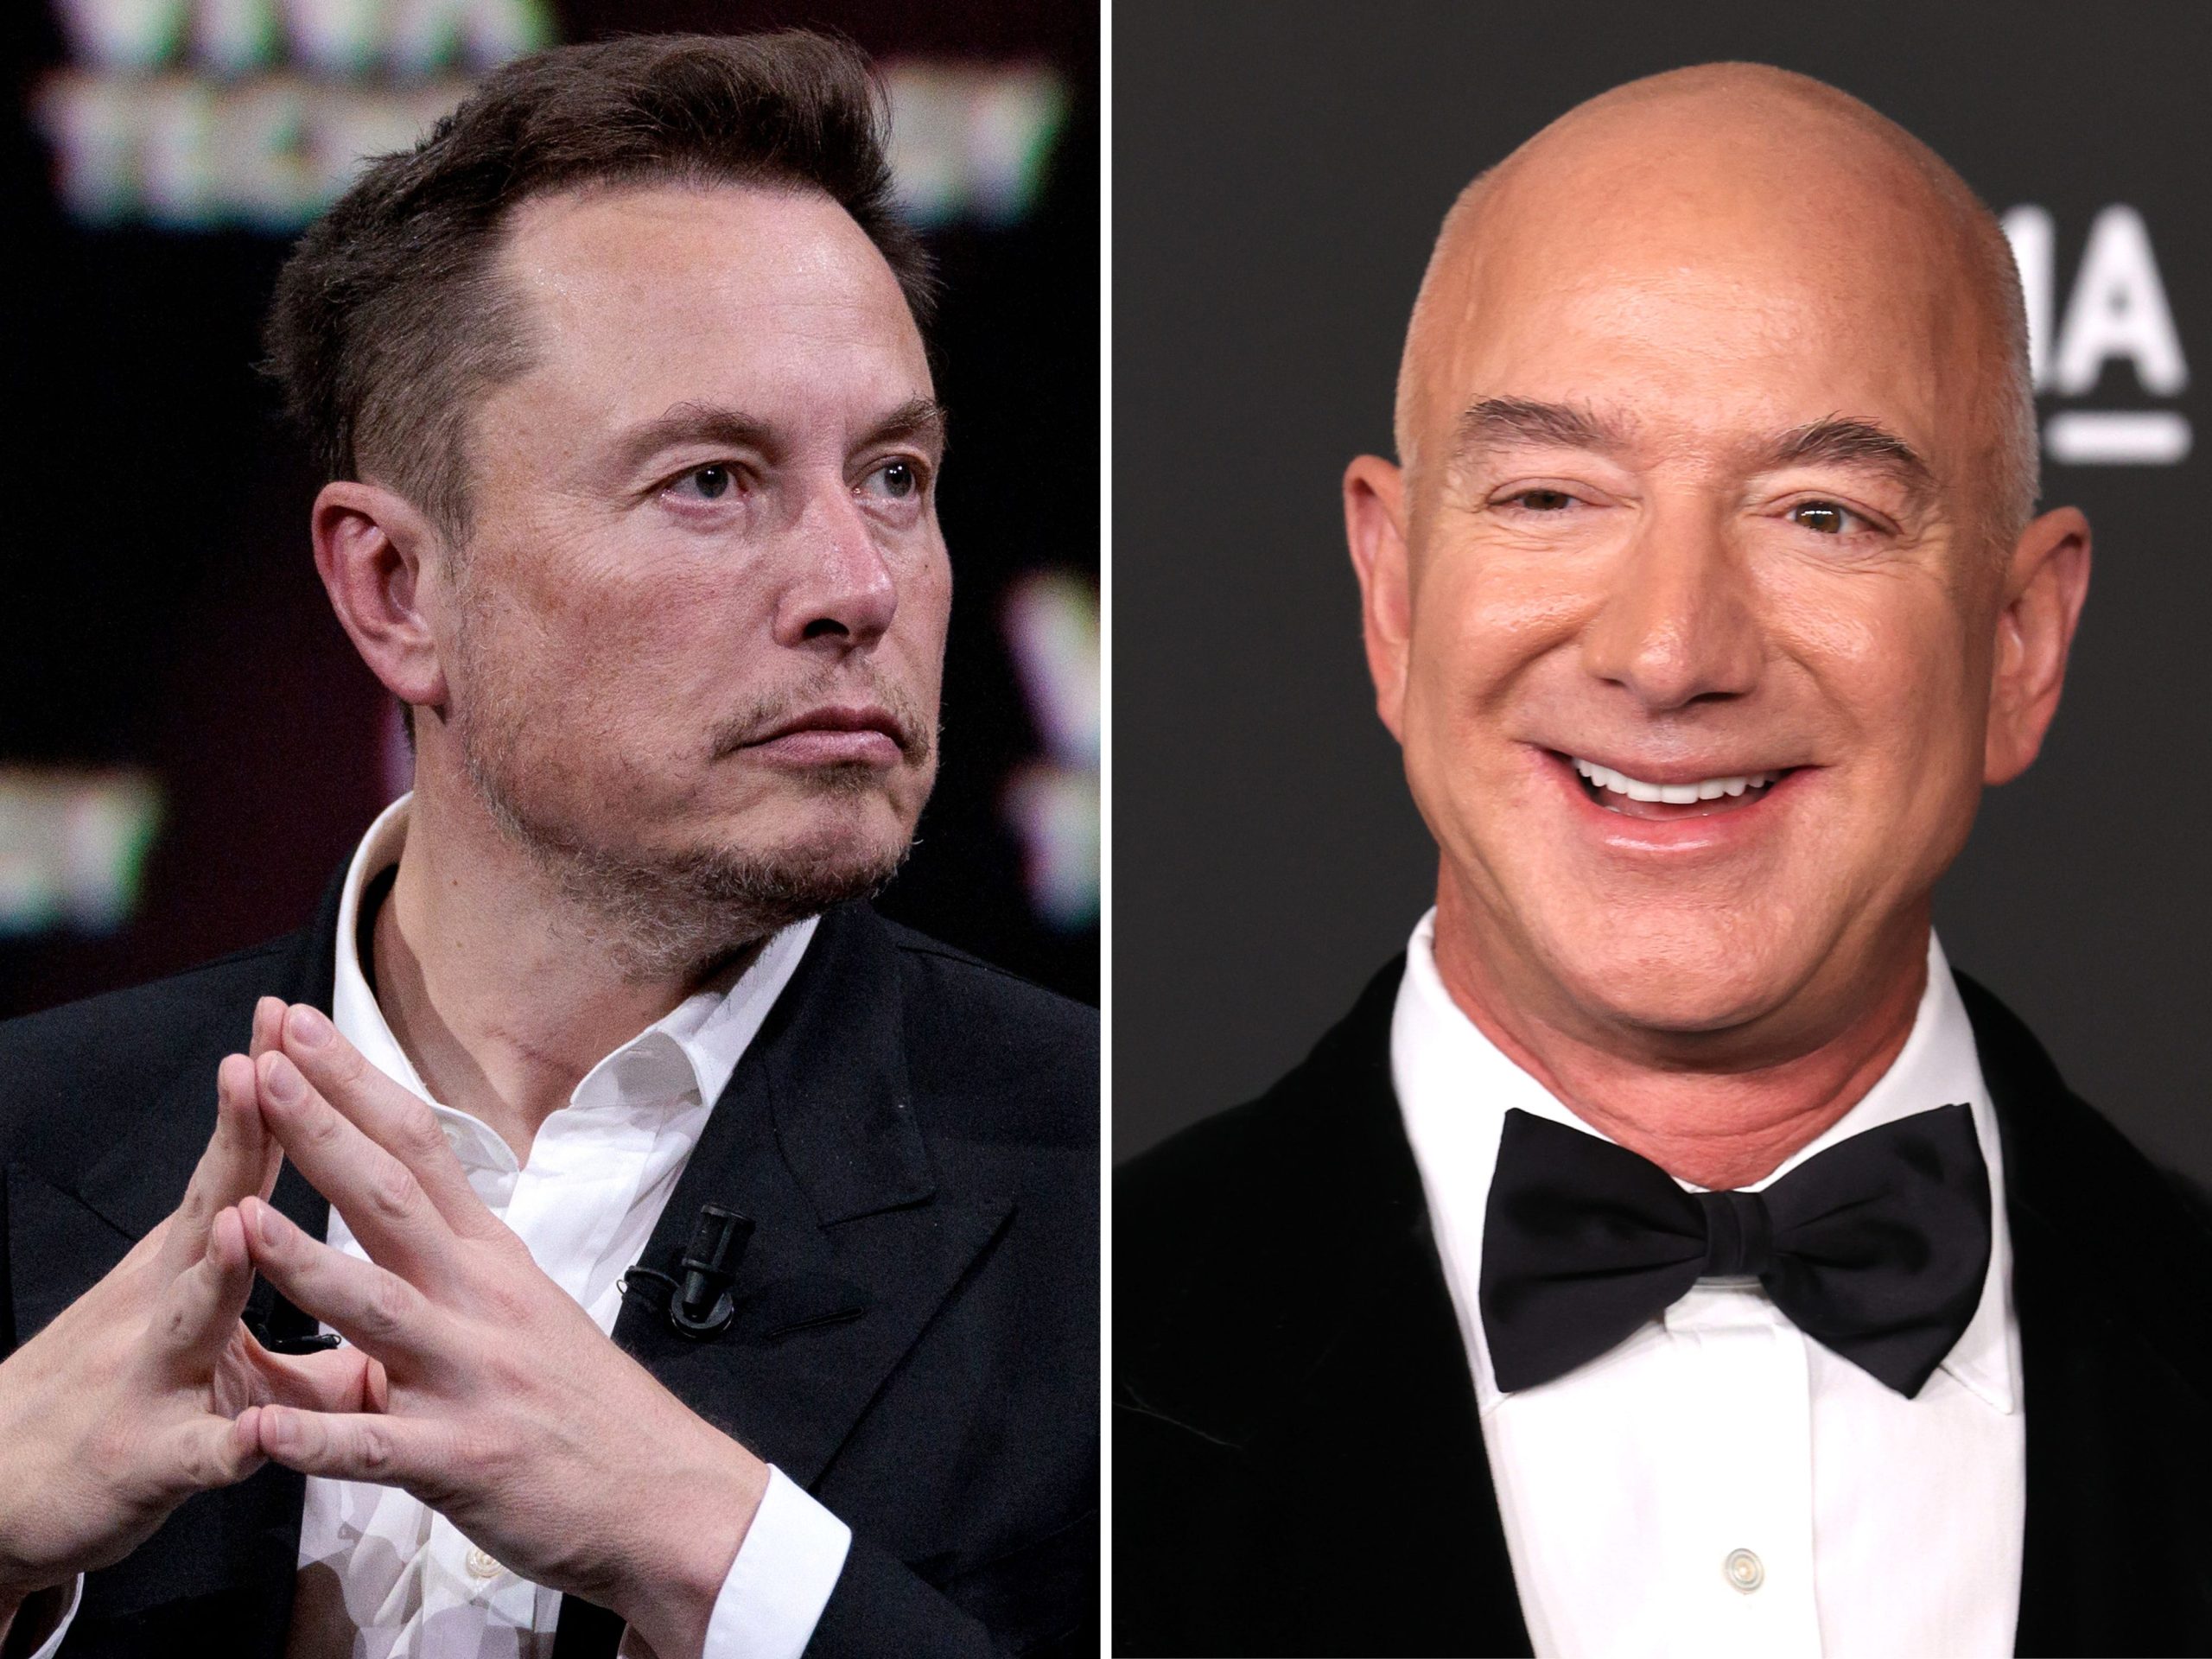 Elon Musk was upset Bezos did not invite him to visit Blue Origin's factory, after Bezos toured SpaceX in 2004, a new book says